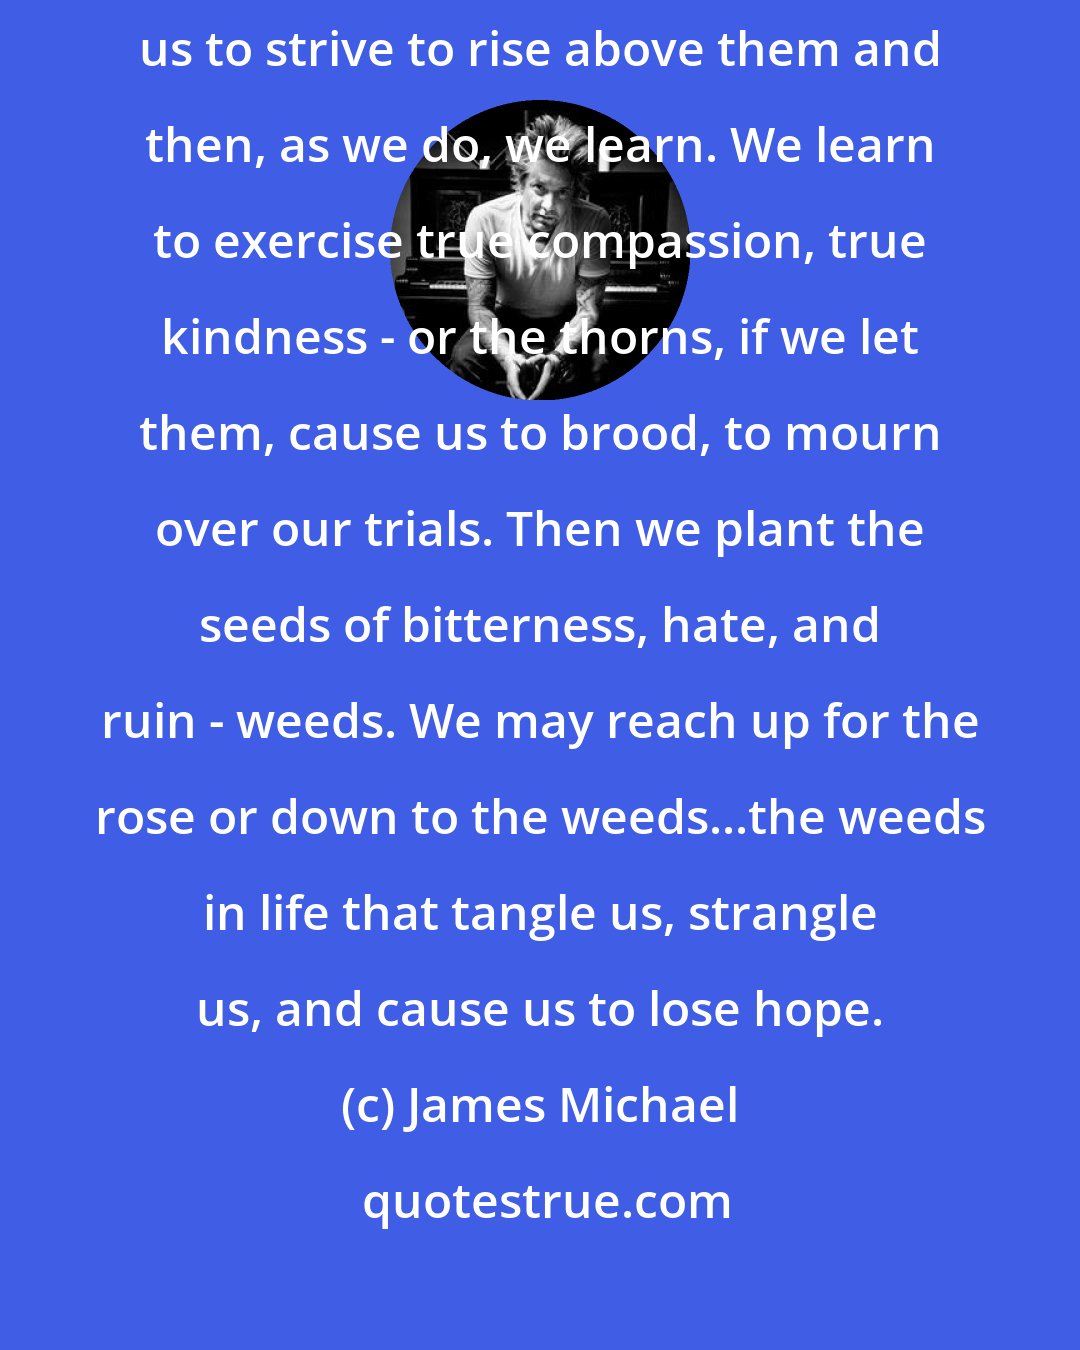 James Michael: So it is with life. Those thorns, the prickly problems of life, cause us to strive to rise above them and then, as we do, we learn. We learn to exercise true compassion, true kindness - or the thorns, if we let them, cause us to brood, to mourn over our trials. Then we plant the seeds of bitterness, hate, and ruin - weeds. We may reach up for the rose or down to the weeds...the weeds in life that tangle us, strangle us, and cause us to lose hope.